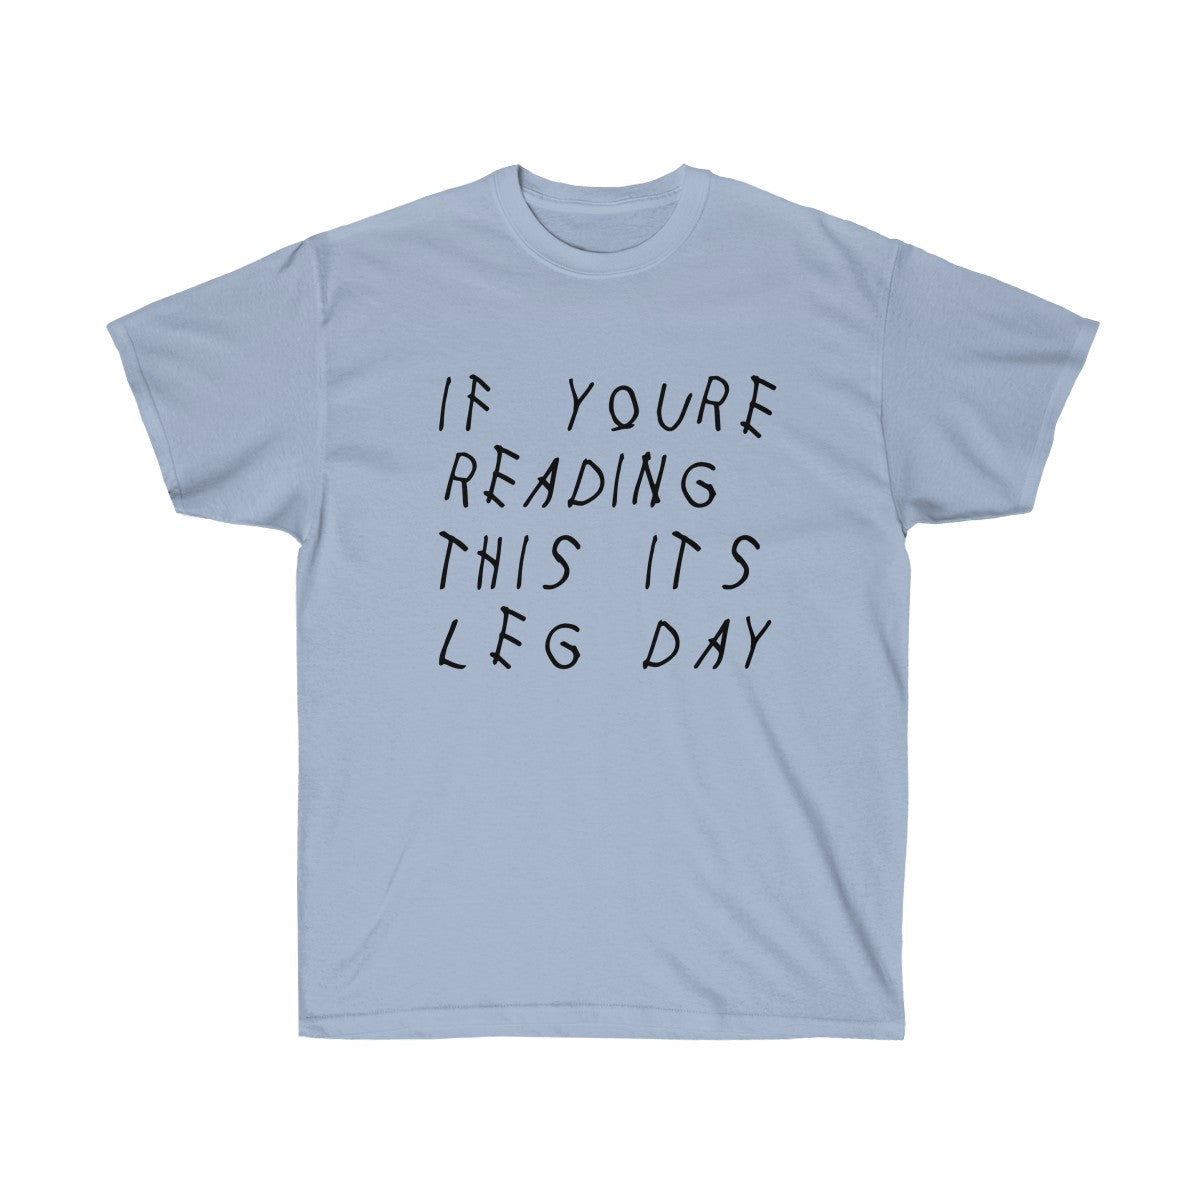 If your reading this it's leg day Drake inspired workout Tee-Light Blue-S-Archethype